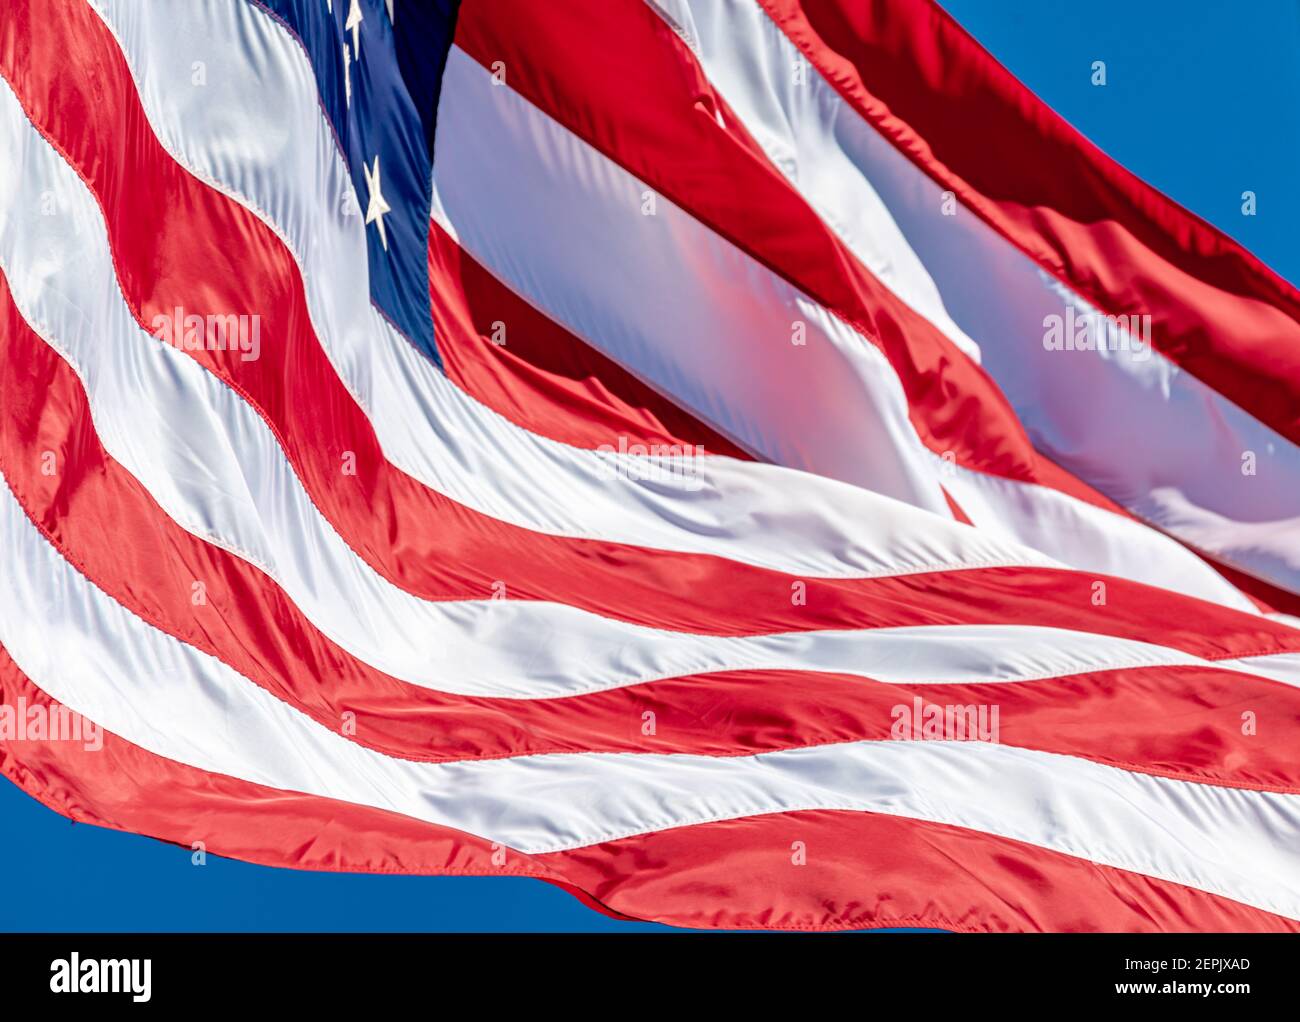 detail of a large American flag blowing in the wind Stock Photo